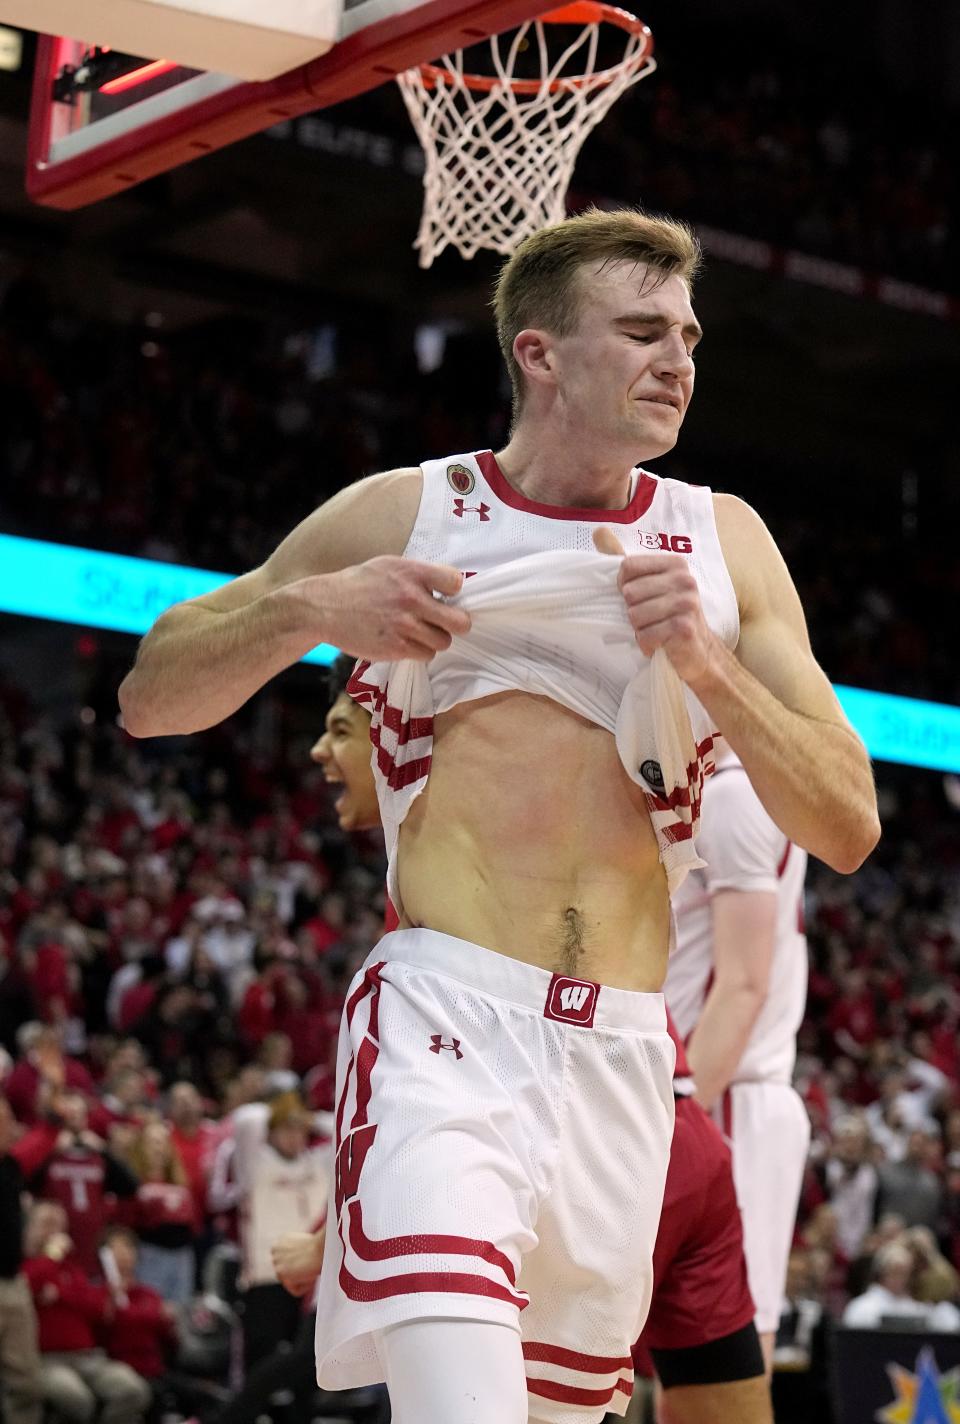 Frustrated Wisconsin forward Tyler Wahl walks off the court after being unble to score on a rebound ahead of the buzzer.